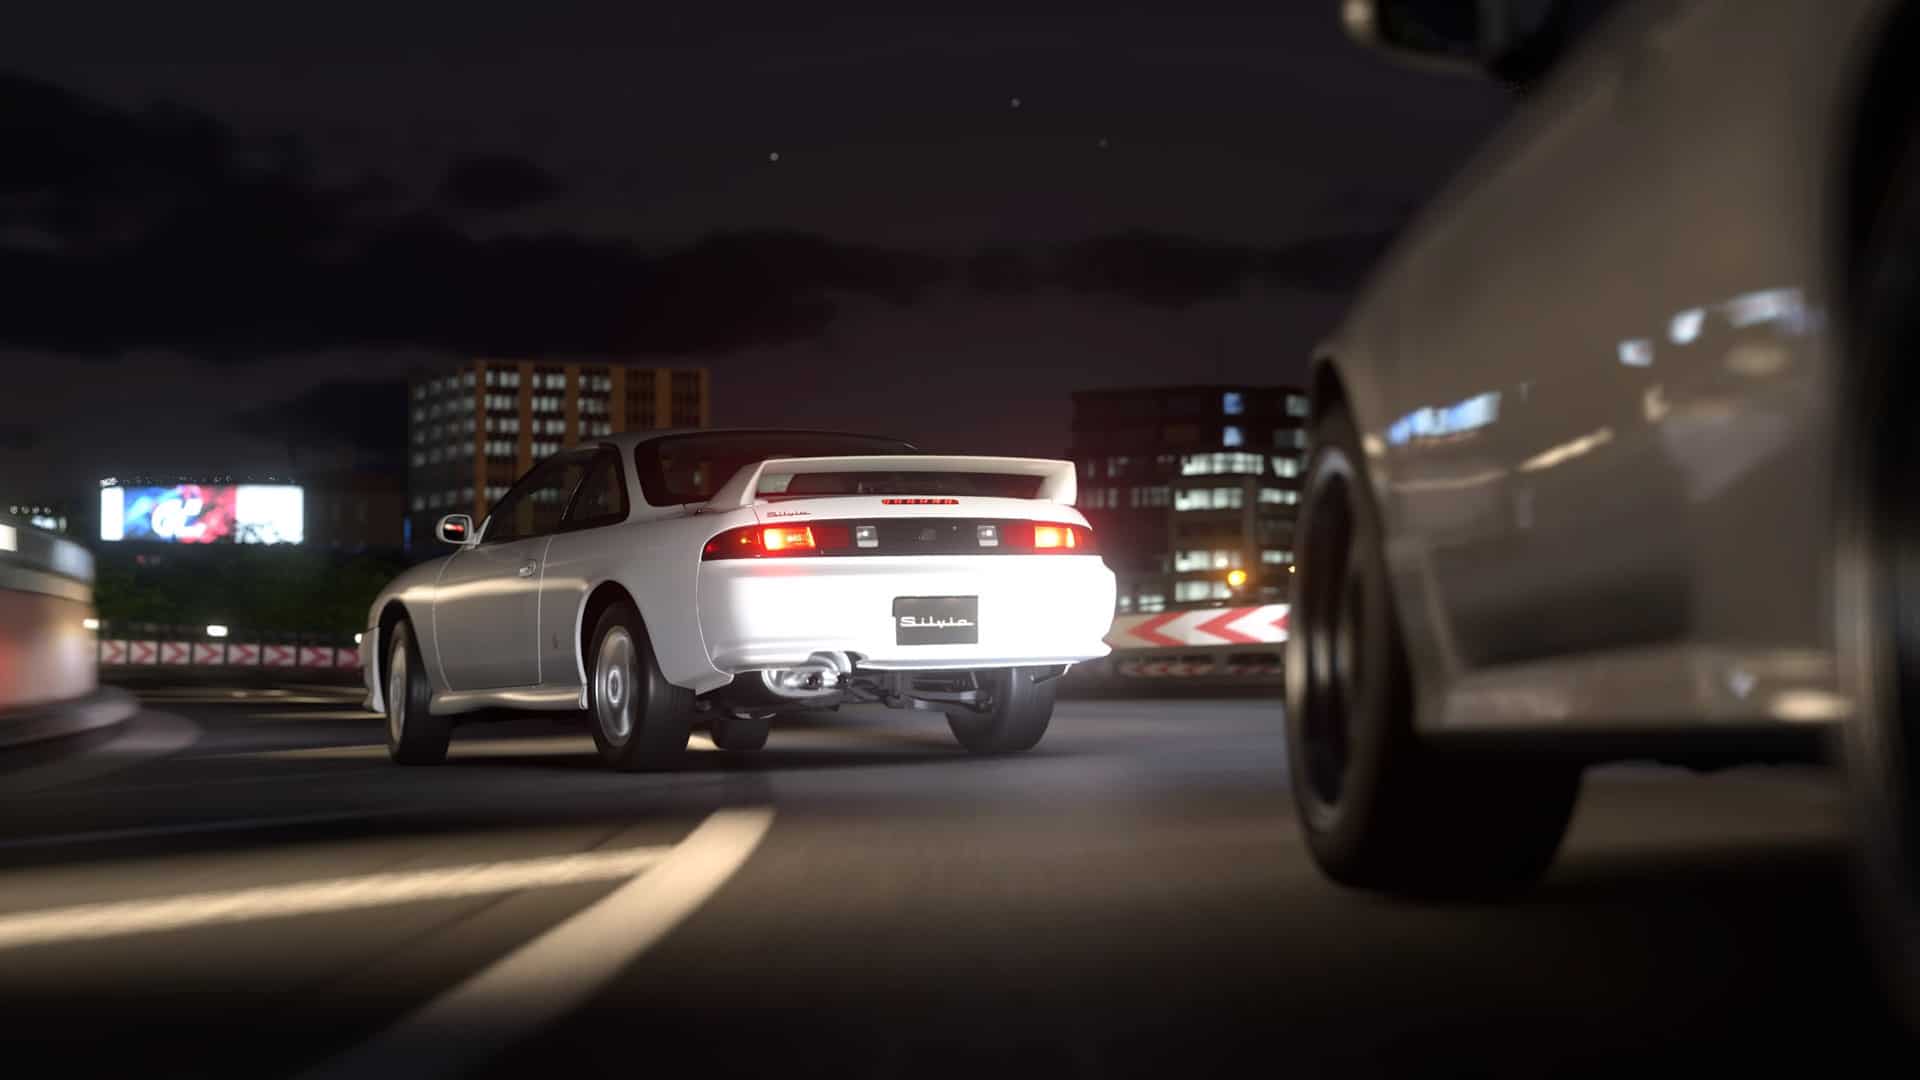 Gran Turismo 7 finally lets you sell your cars